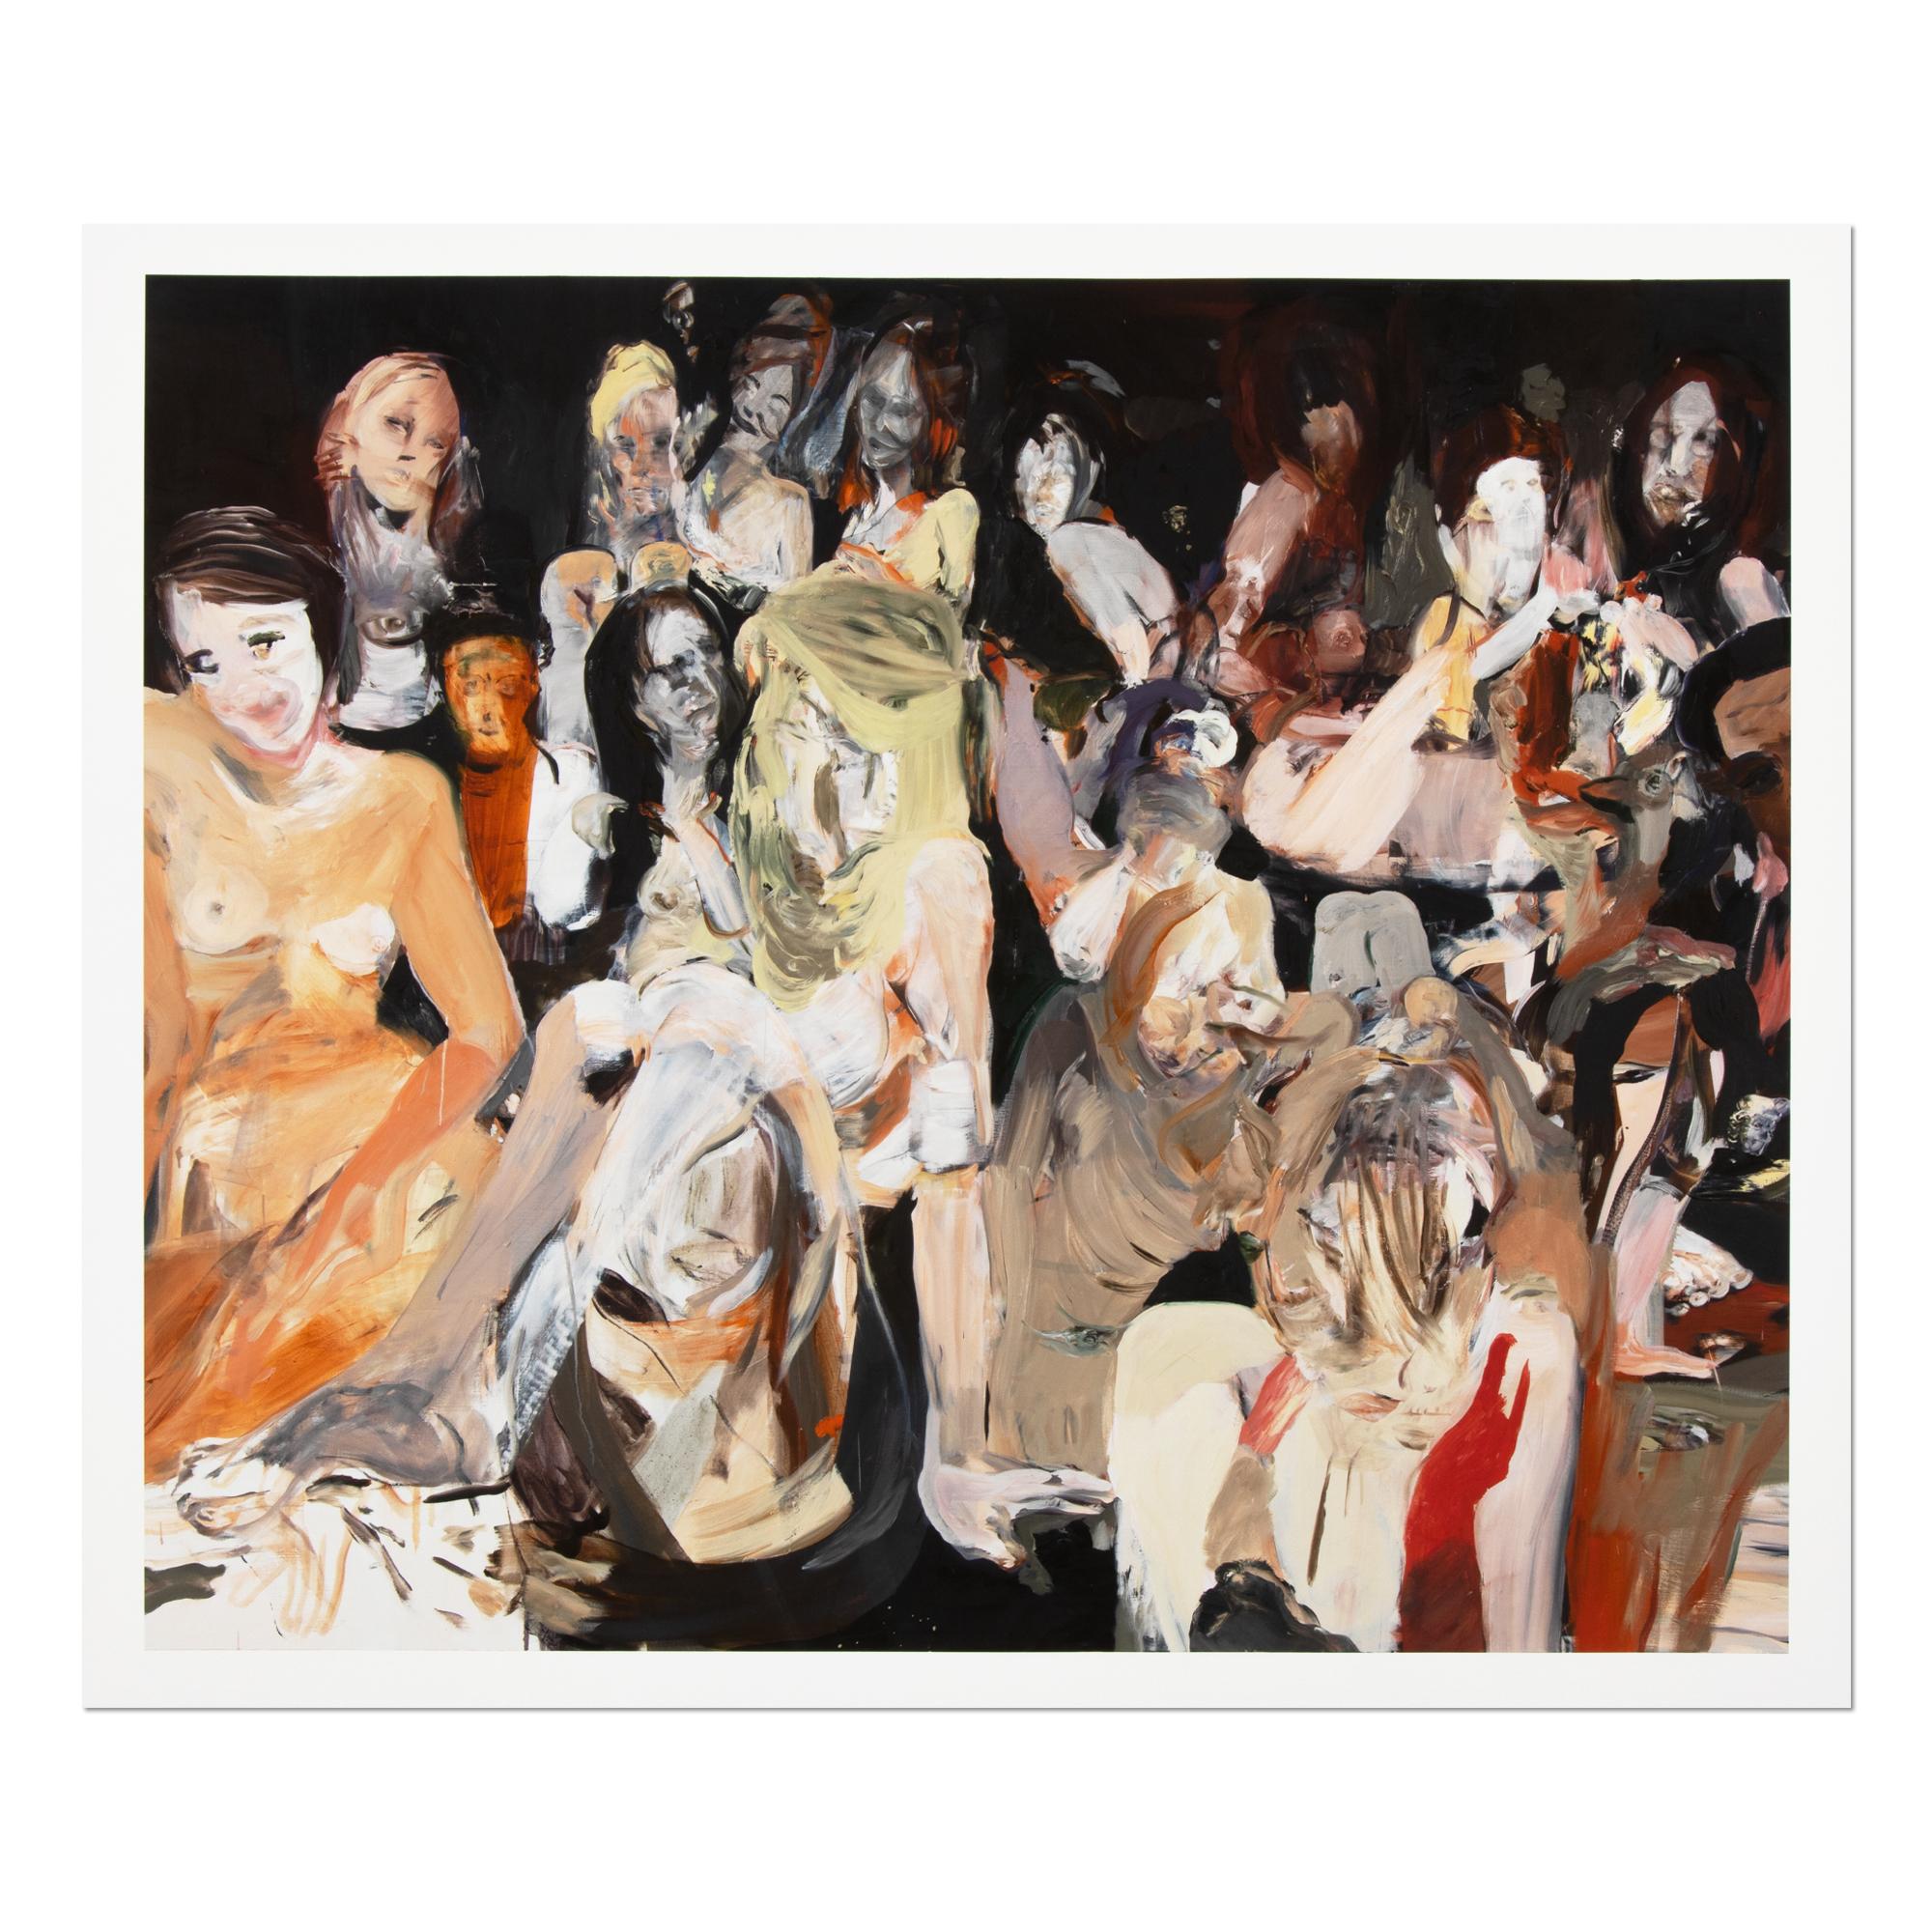 Cecily Brown (British, born 1969)
All the Nightmares Came Today, 2012/2019
Medium: Digital archival print
Dimensions: 50.8 x 61 cm (20 x 24 in)
Edition of 100: Hand-signed and numbered, verso on archival label
Condition: Excellent